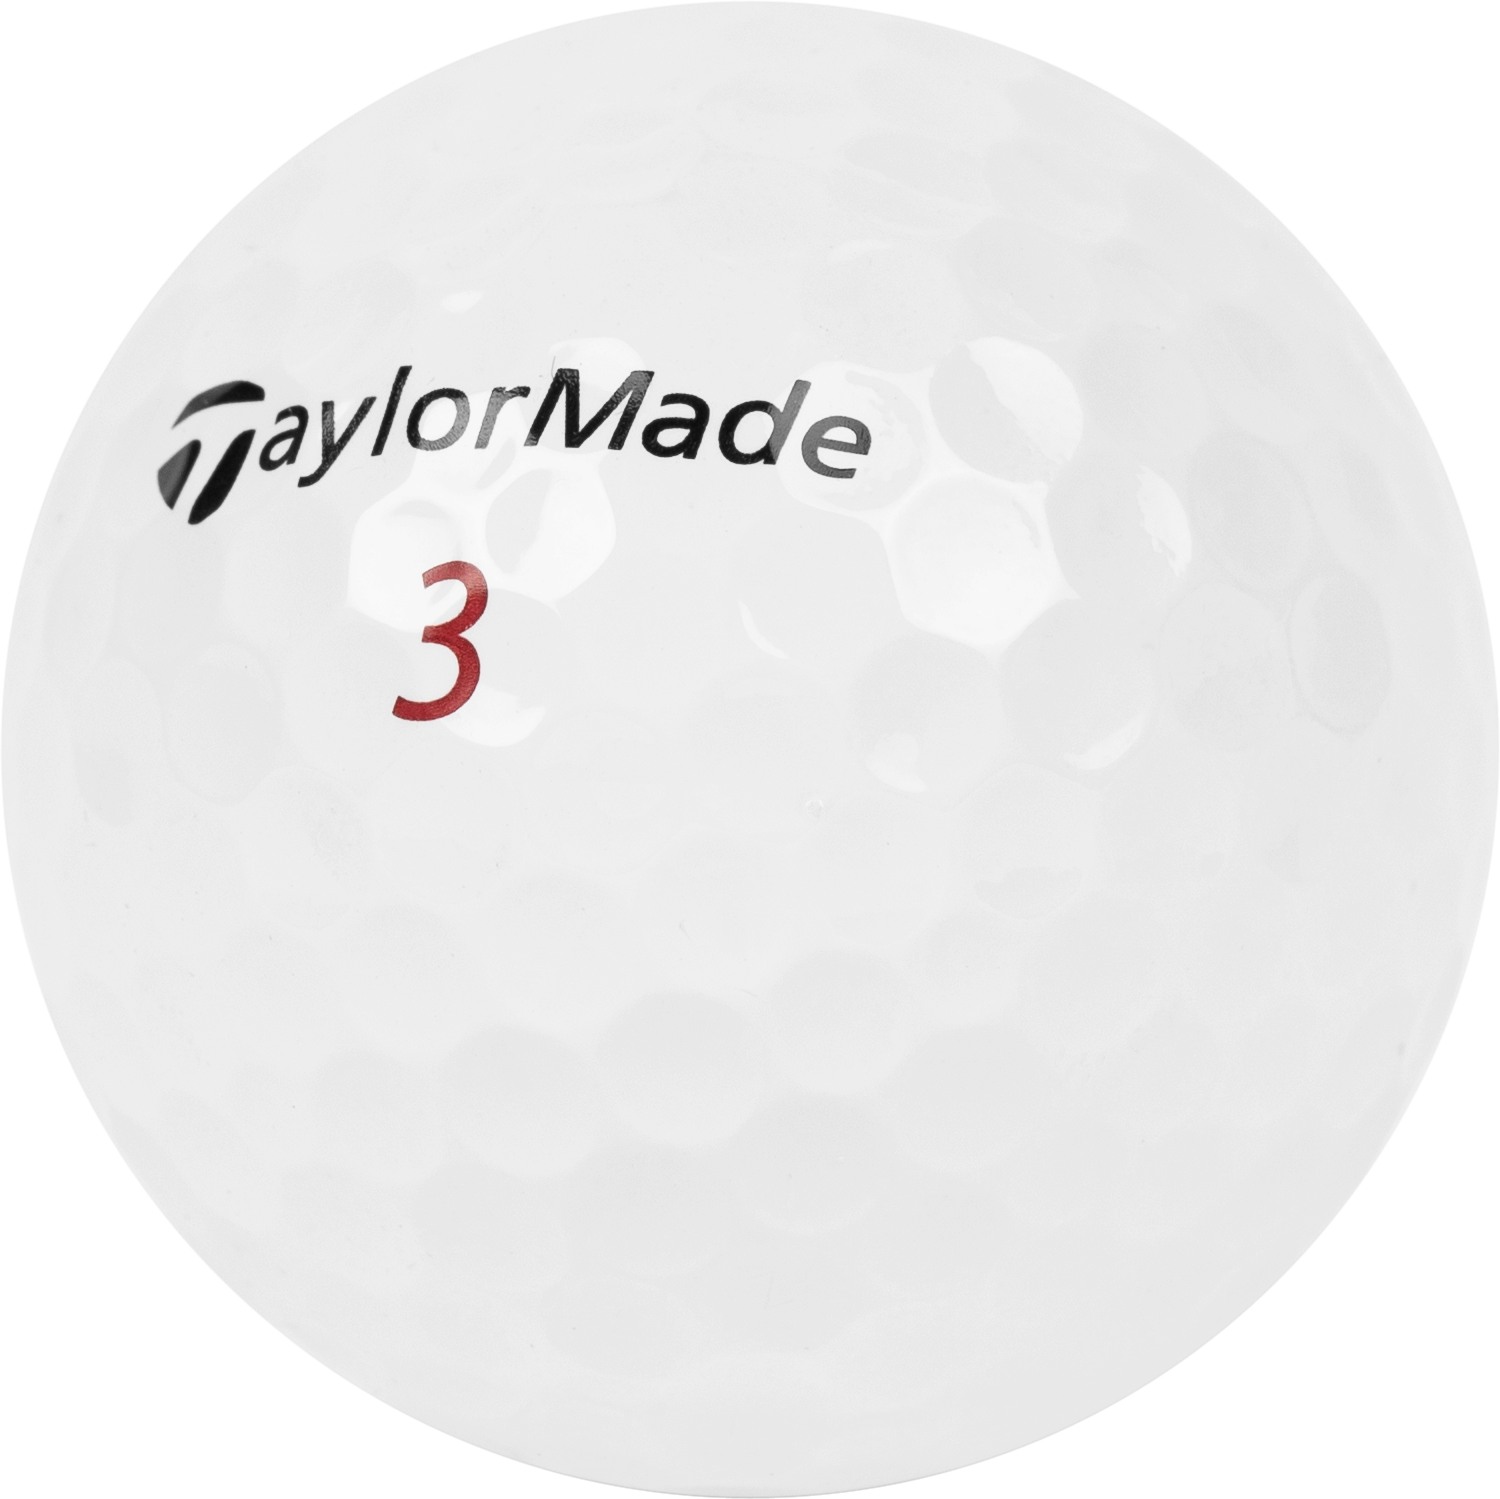 close up view of recycled and used taylormade golf ball